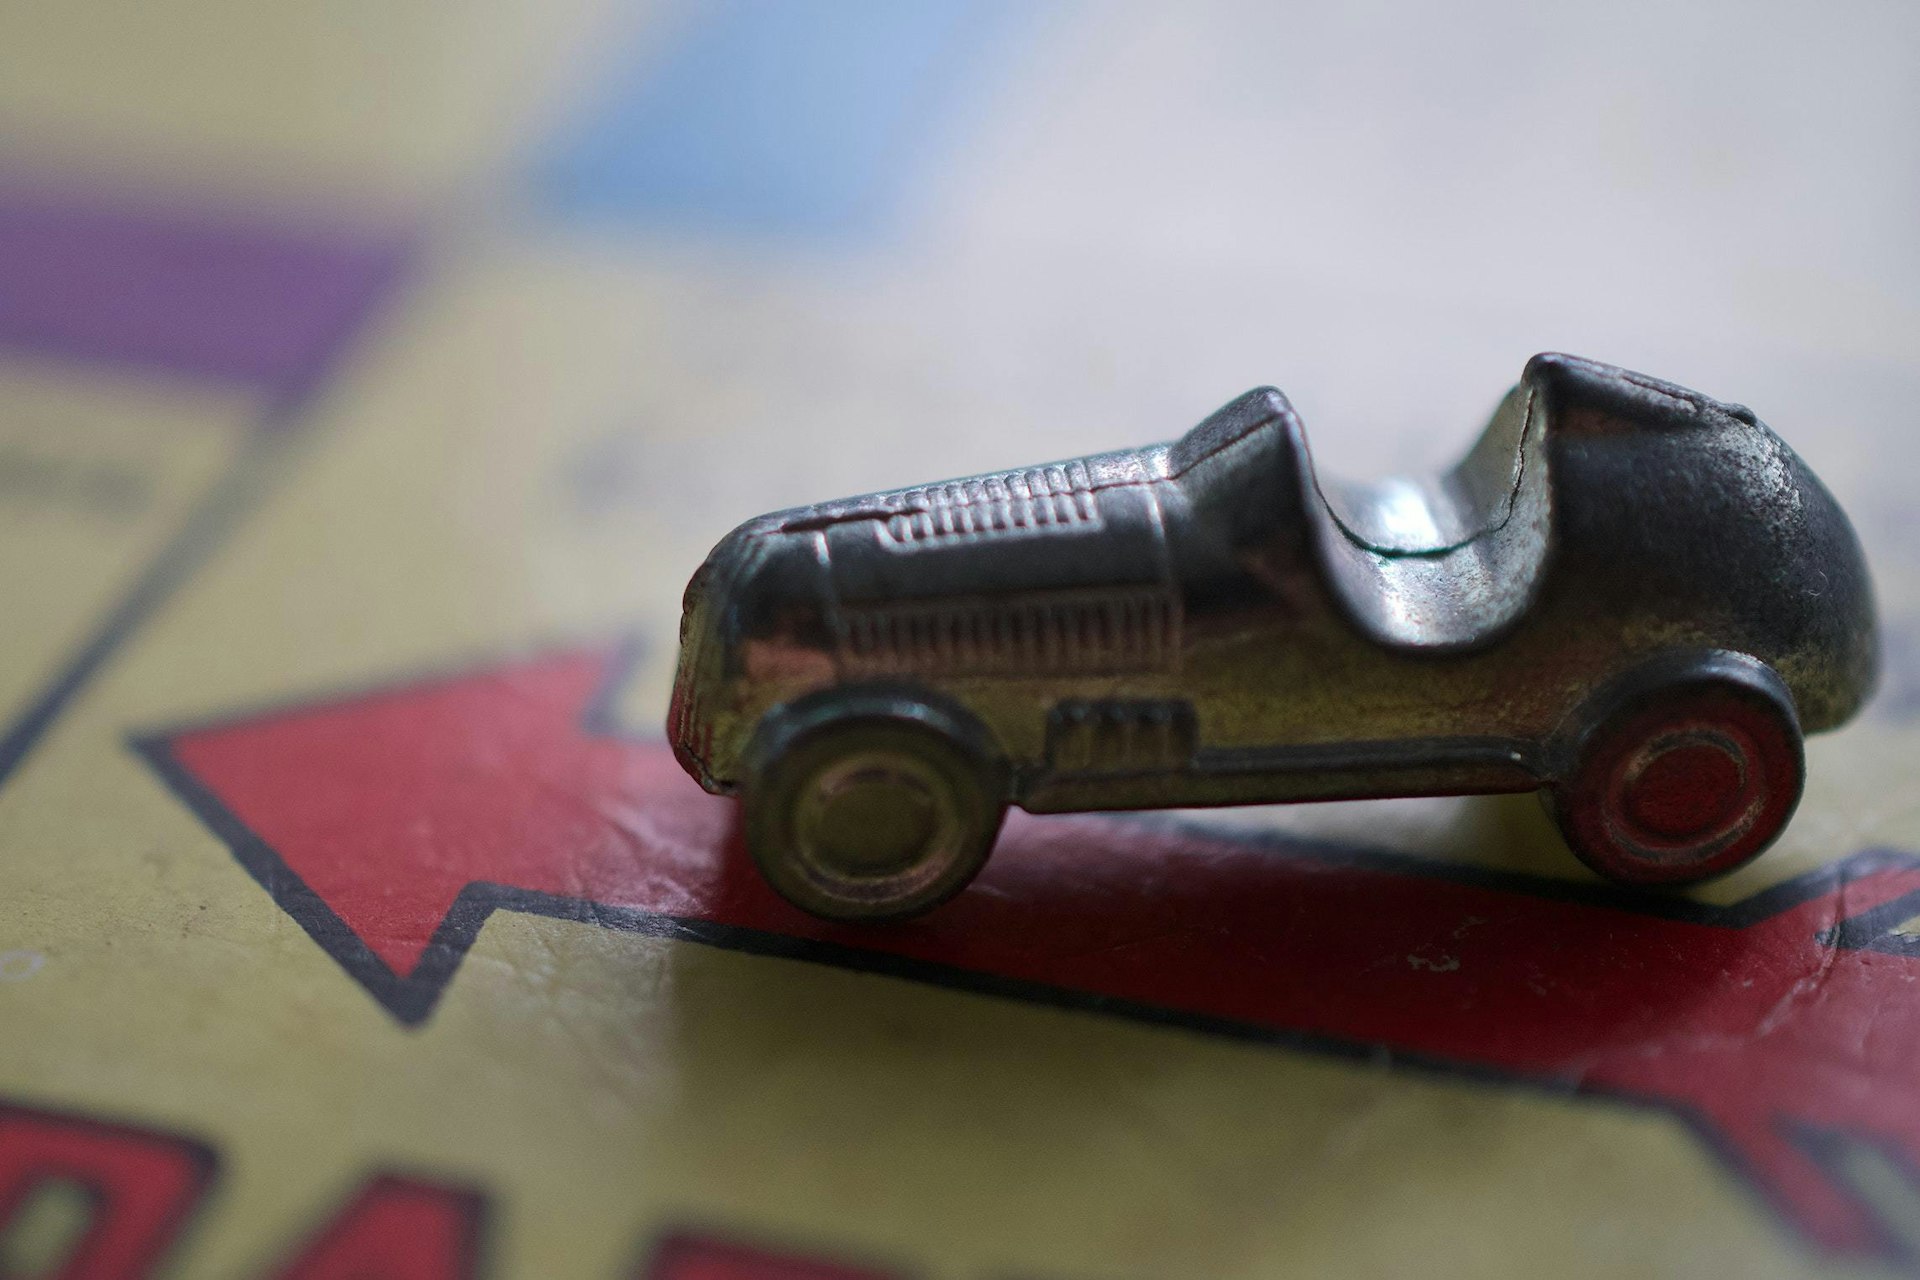 The hidden world of Monopoly and its anti-capitalist roots